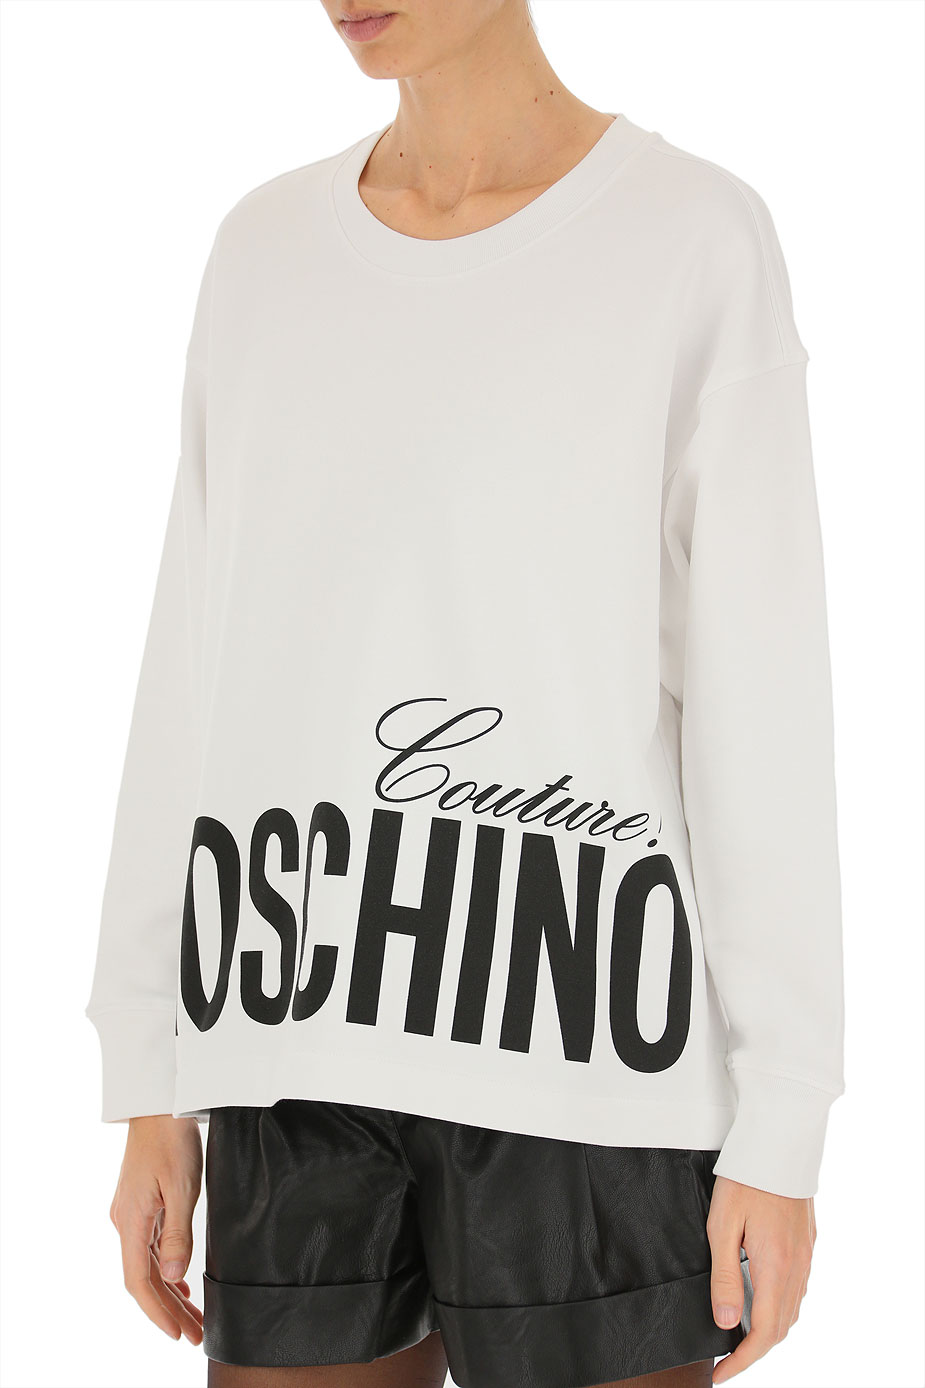 Womens Clothing Moschino, Style code: a1704-0527-1001